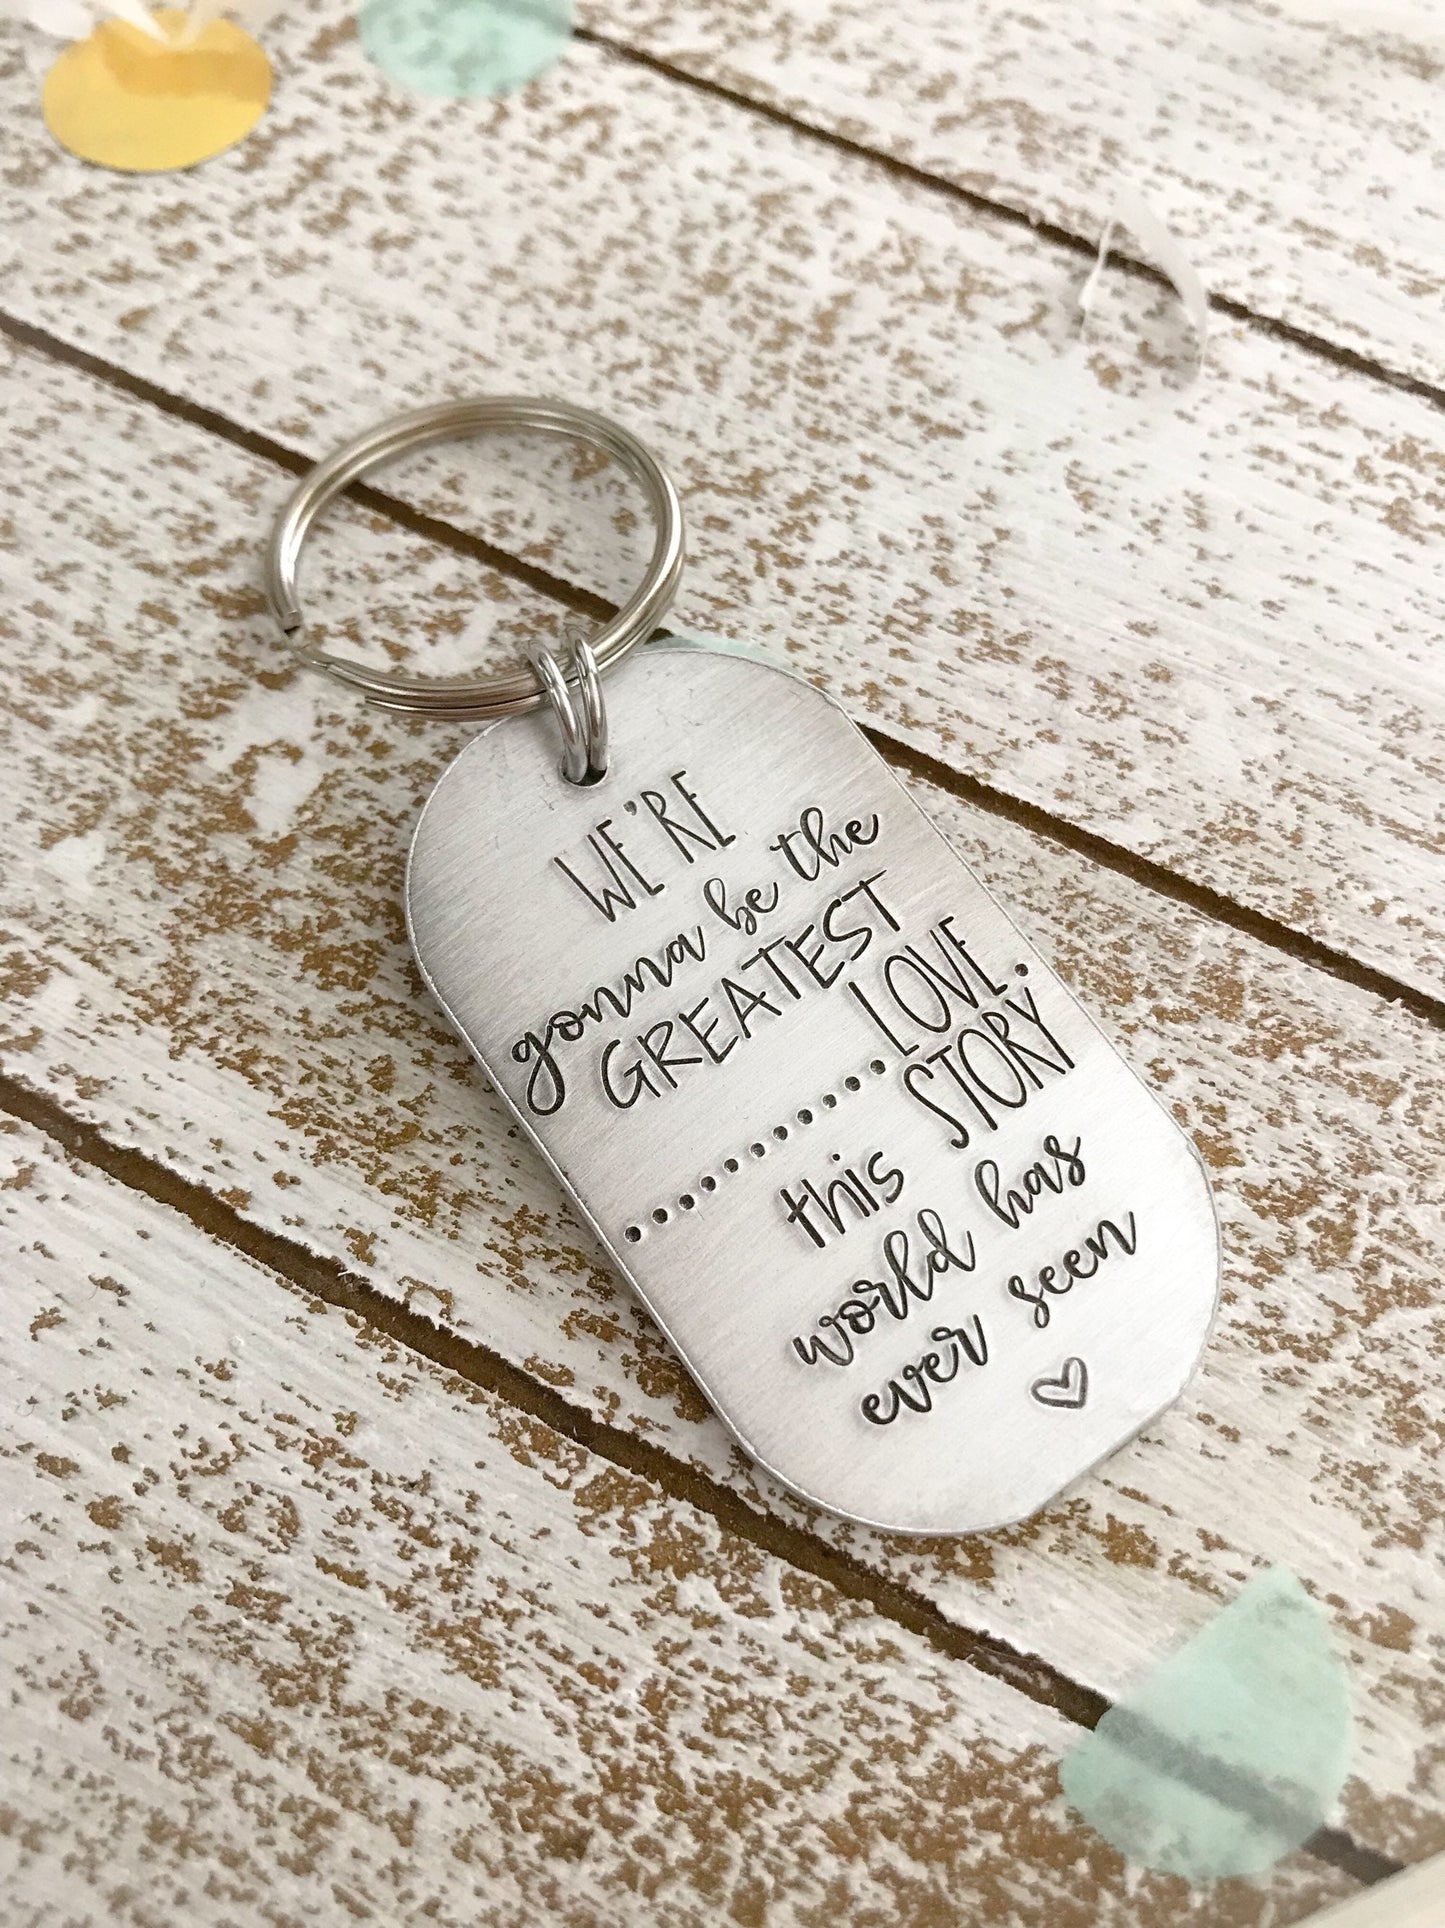 We're gonna be the greatest love story keychain--anniversary gift--love keychain--song--wedding gift--christmas gift--birthday gift